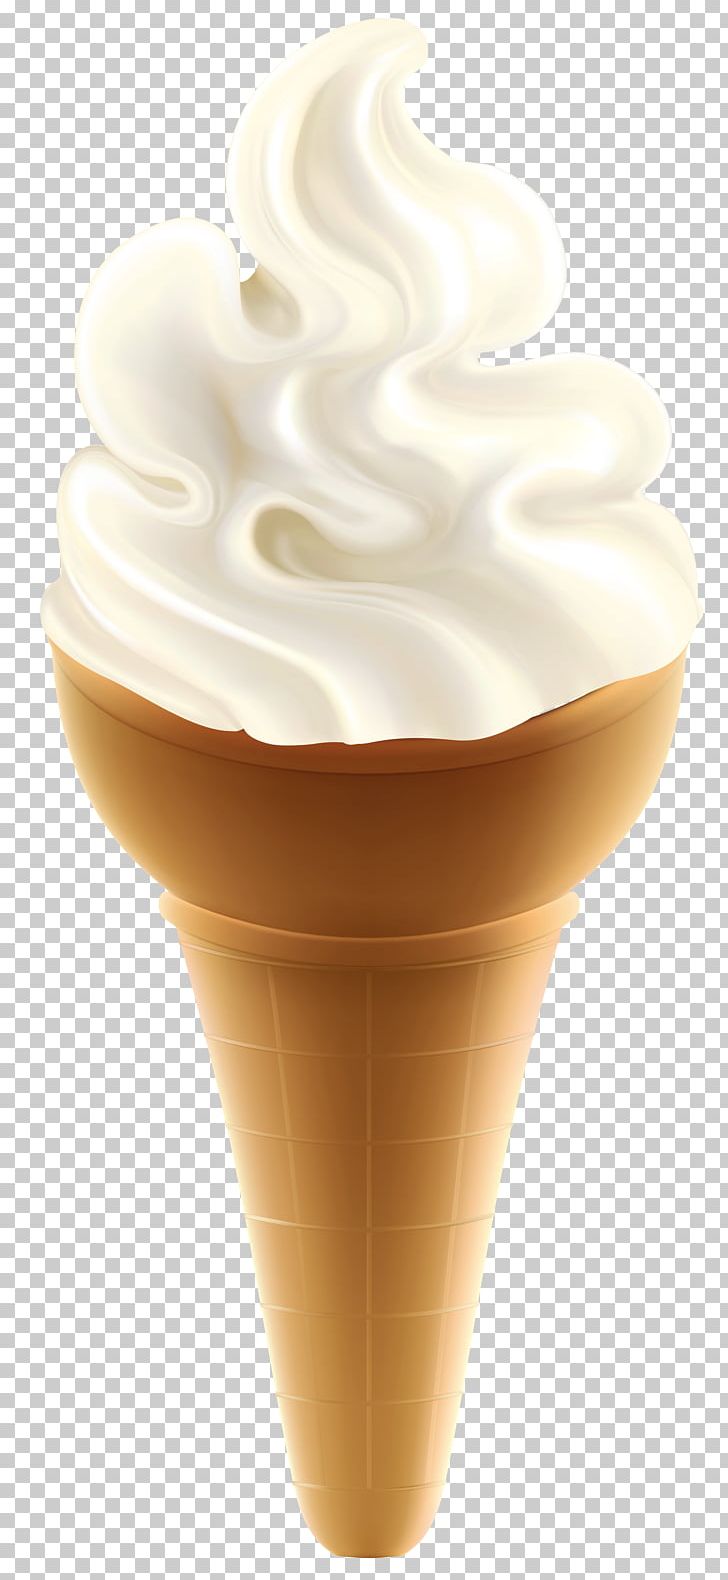 Ice Cream Cones Sundae Chocolate Ice Cream PNG, Clipart, Chocolate, Chocolate Ice Cream, Cream, Creme Fraiche, Dairy Product Free PNG Download